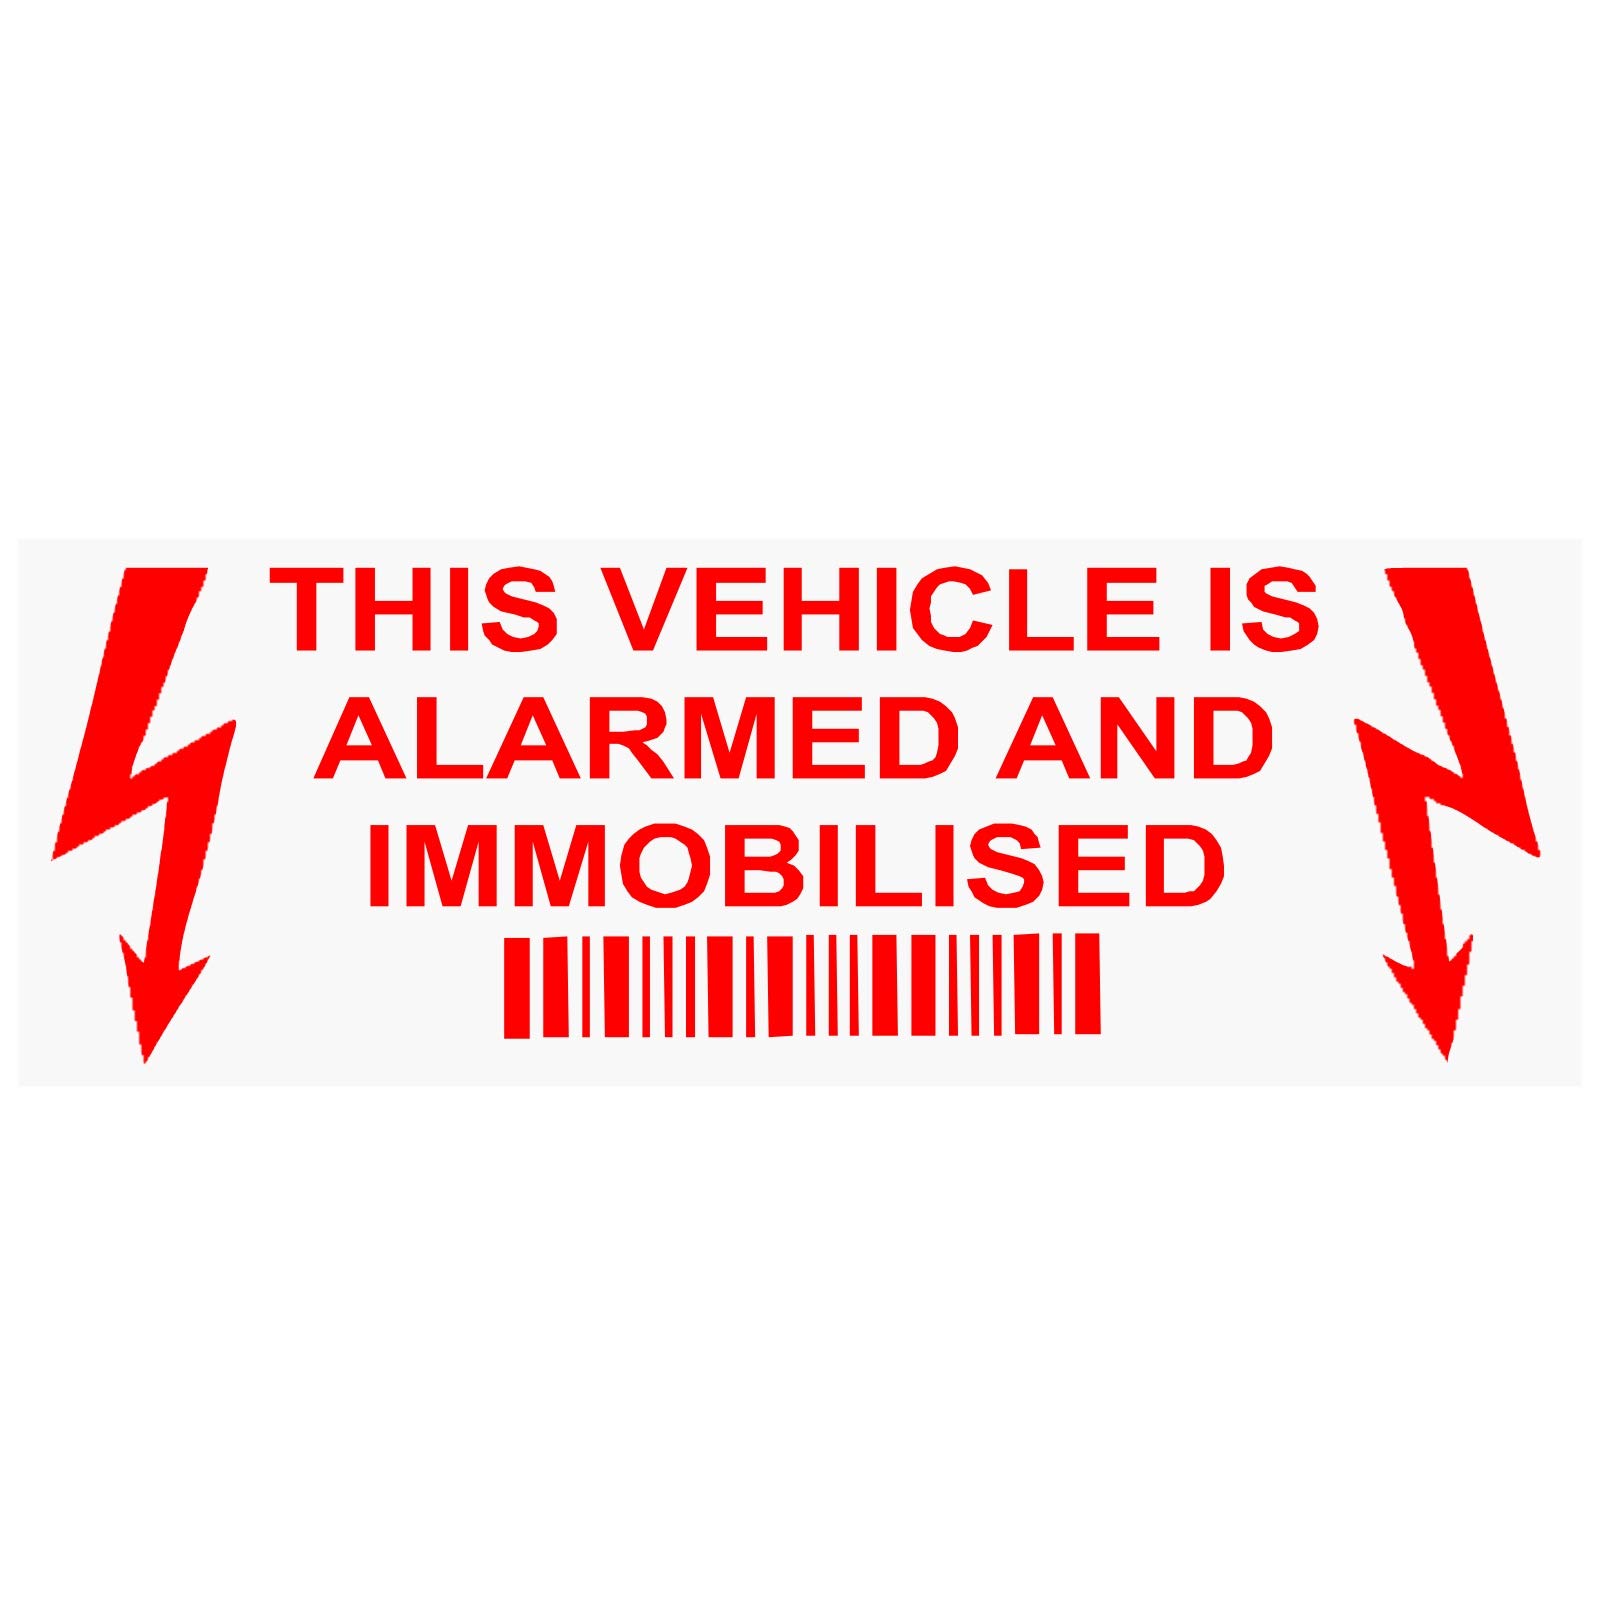 Platinum Place 5 x Alarm and immobilizer Fitted Stickers-red on clear-30mm x 87mm-alarmed and immobilized Security Warning Windows Signs car,Van,Truck,Caravan,Camper,Taxi,Deterrence,Security von Platinum Place